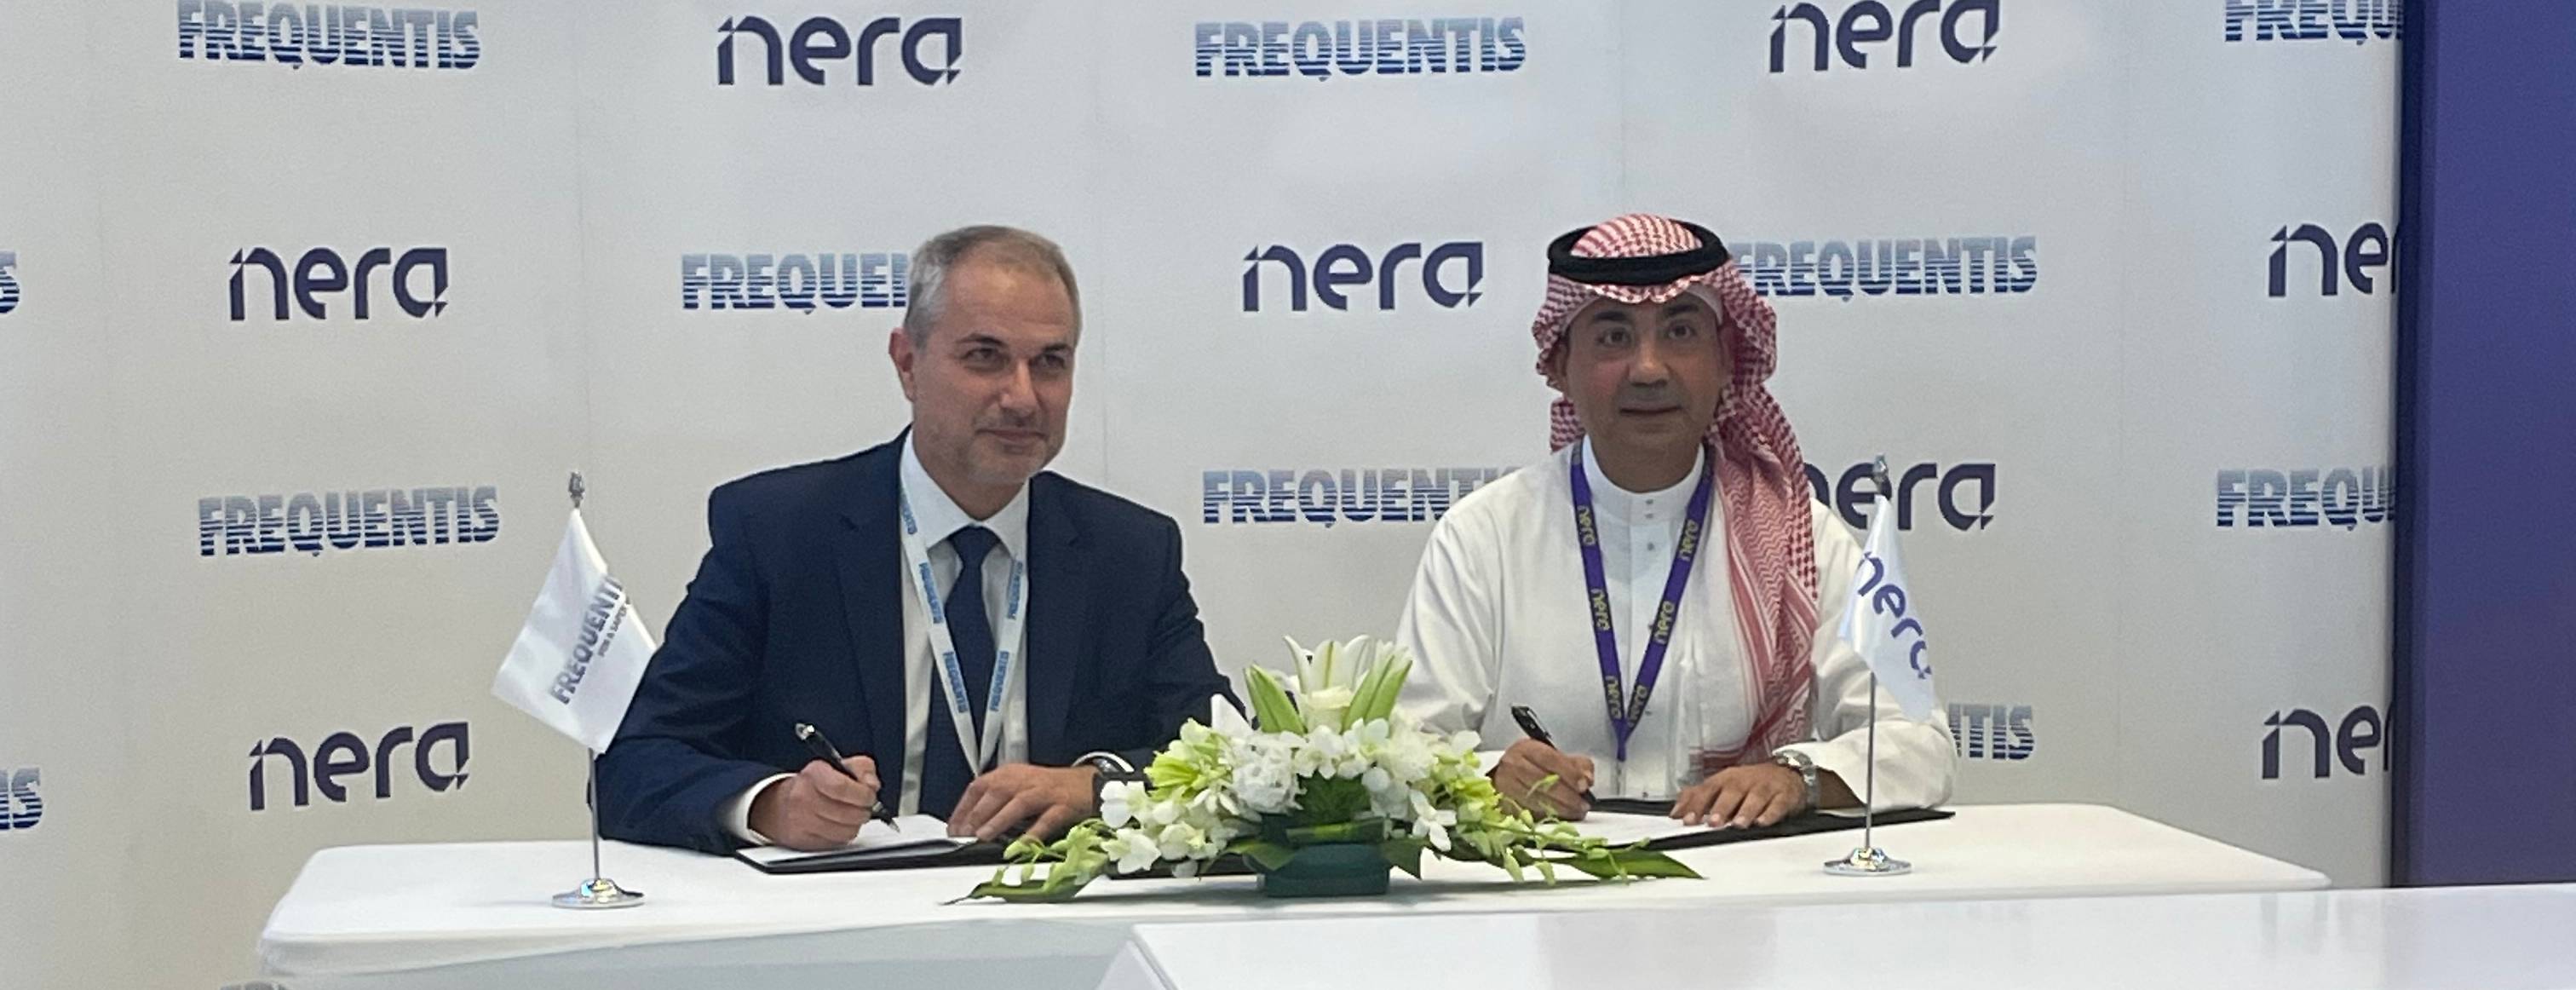 contract signing frequentis nera